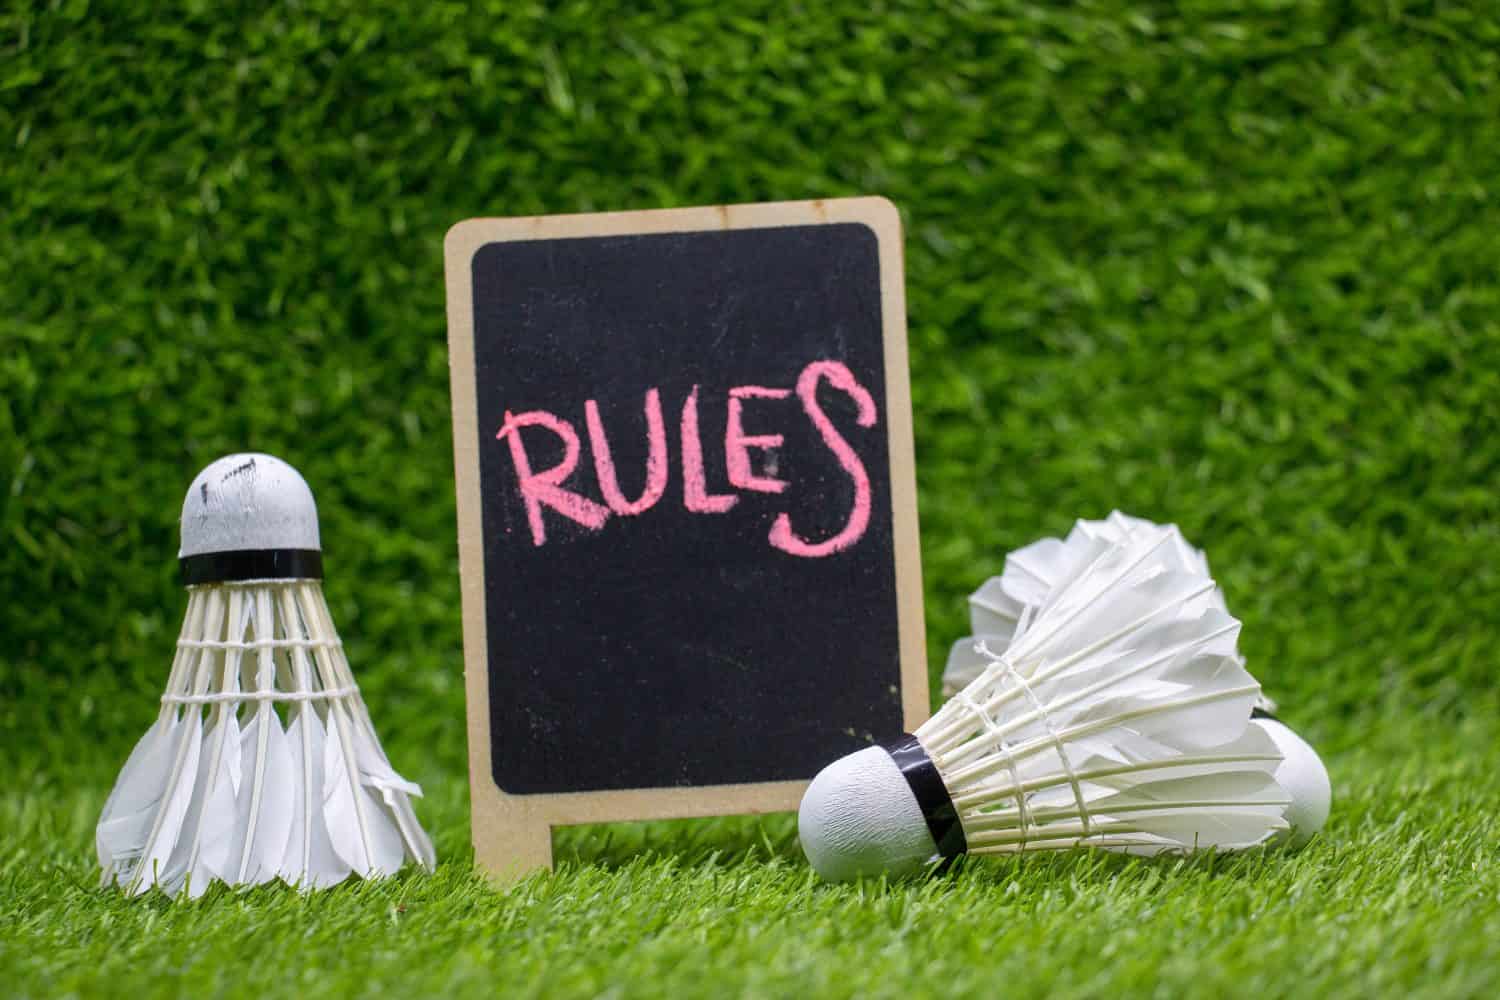 Rules of Badminton with shuttlecocks on green grass